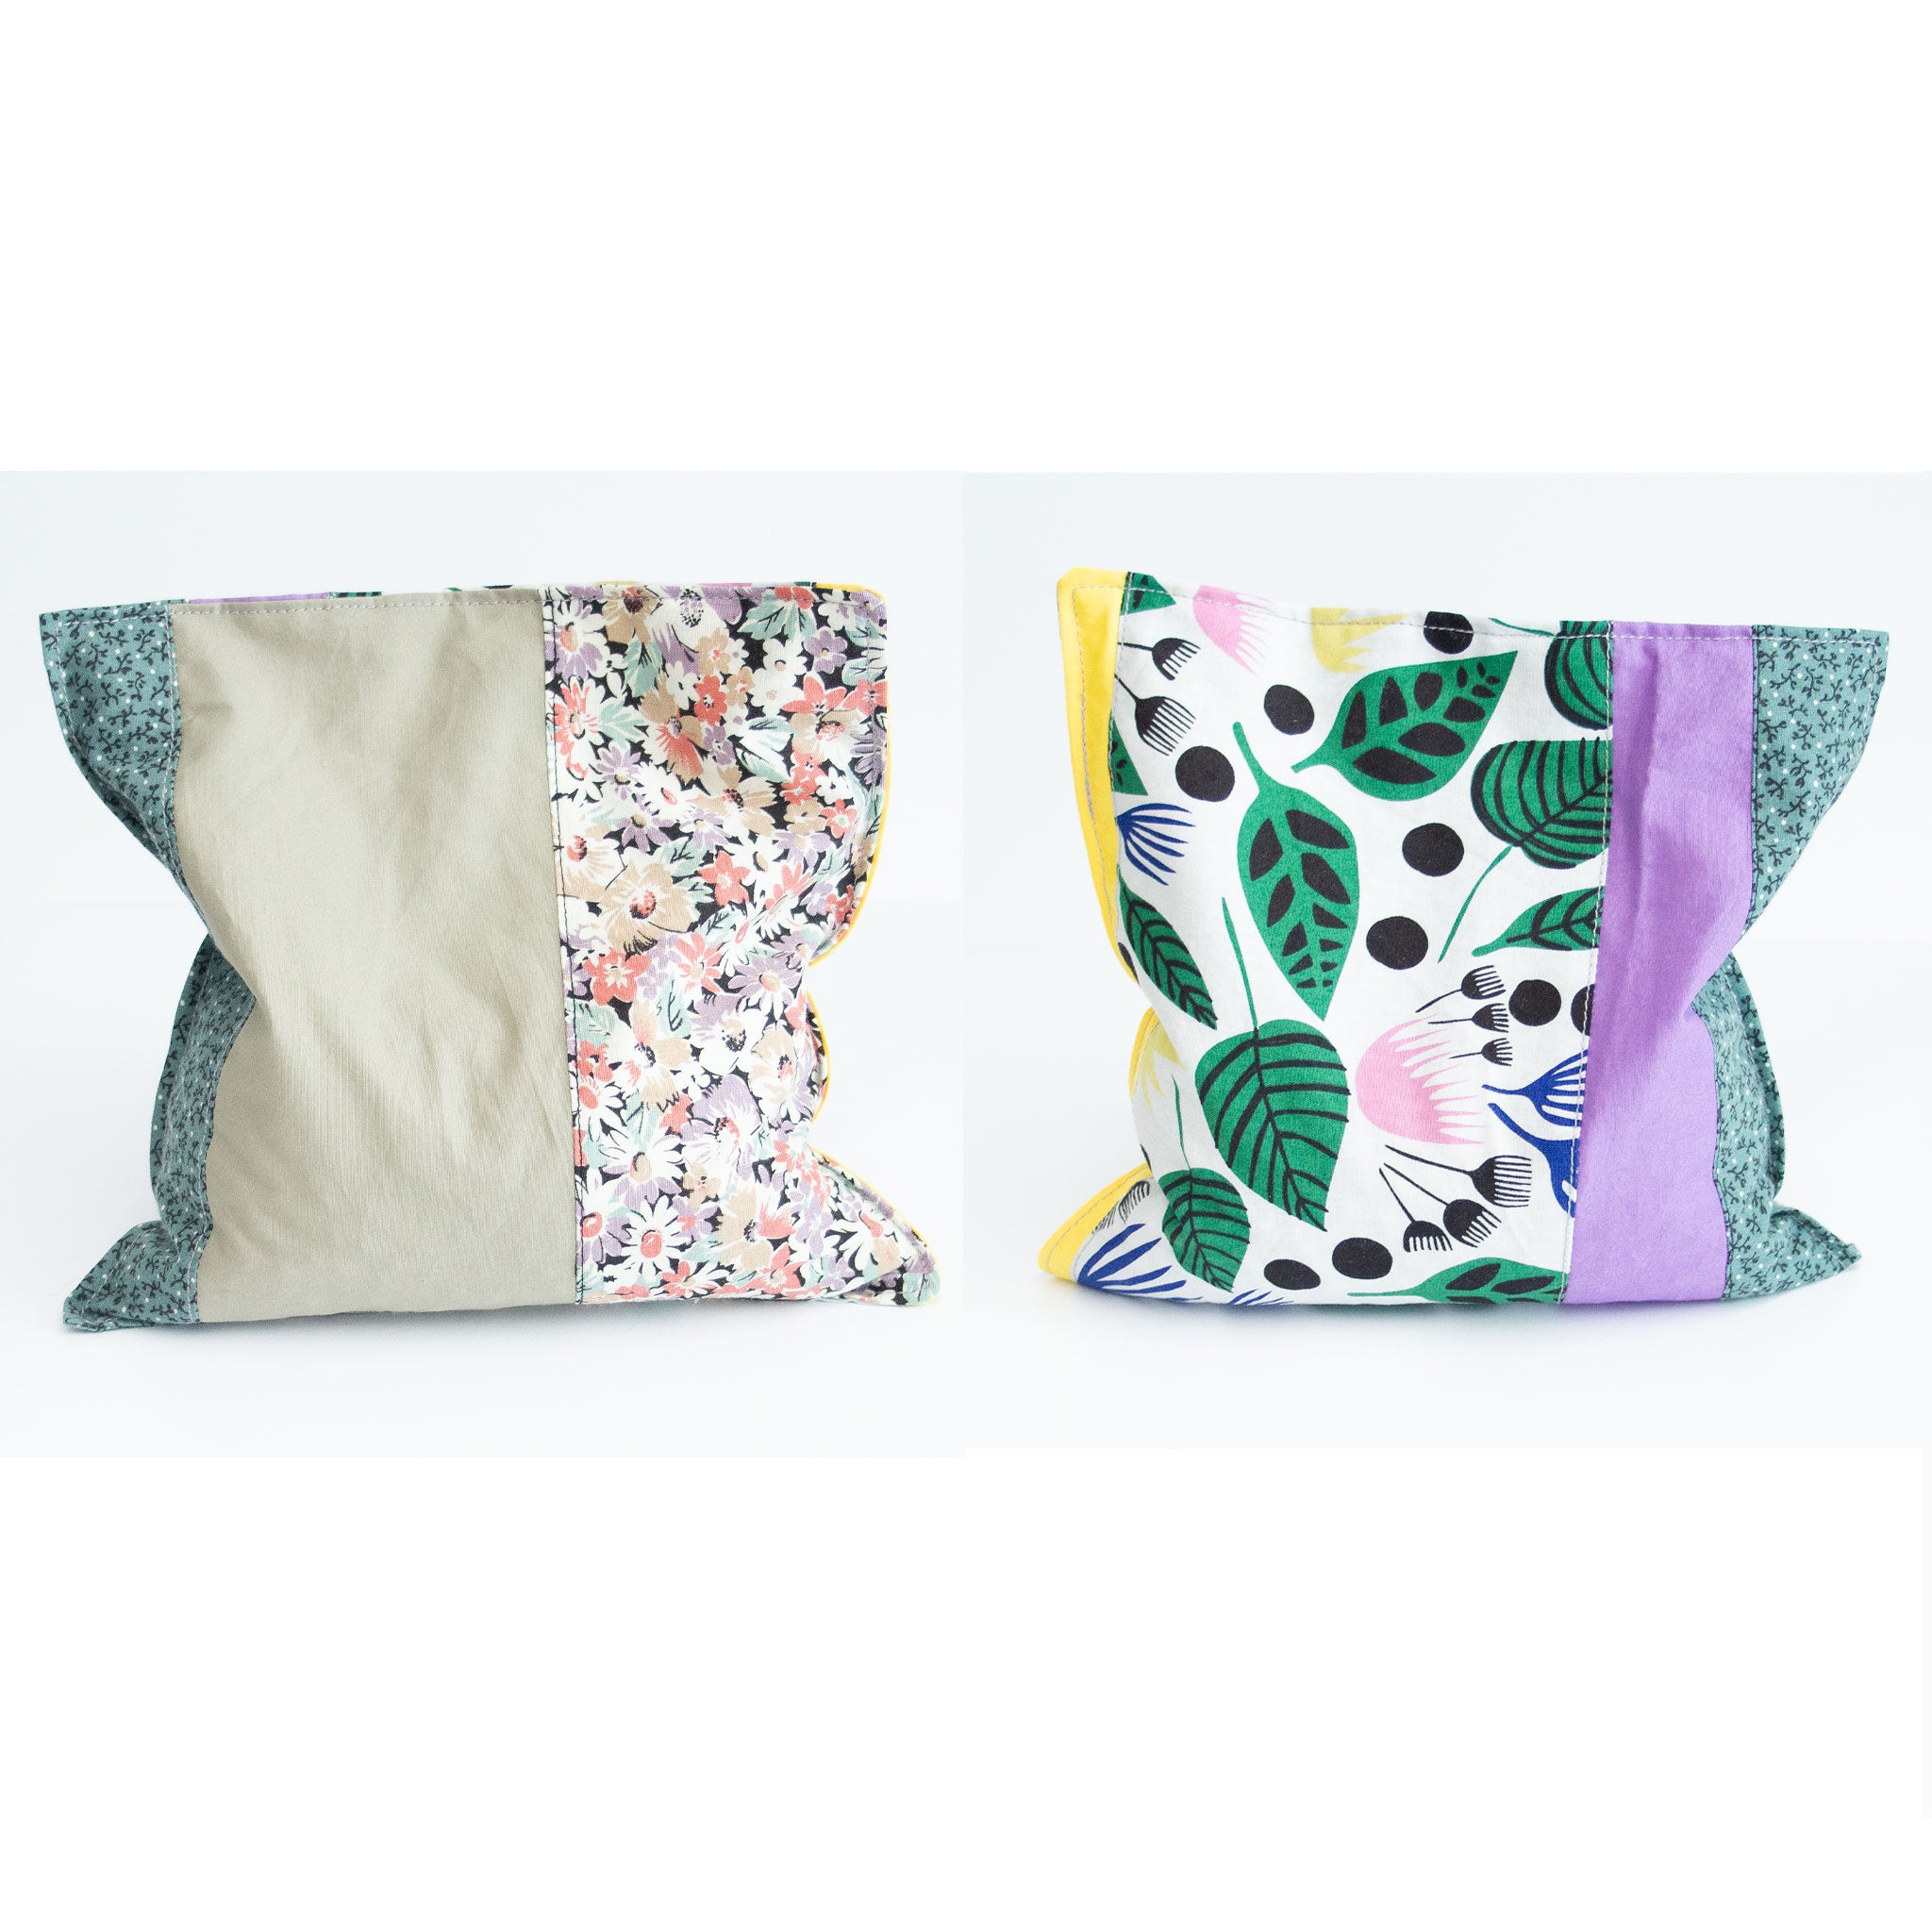 Two grain bags sit side by side showing front and back patchwork patterns. Front and back of patchwork (floral prints and solid sage green, yellow and purple) rectangle cherry pit grain bag. Sit on white background.